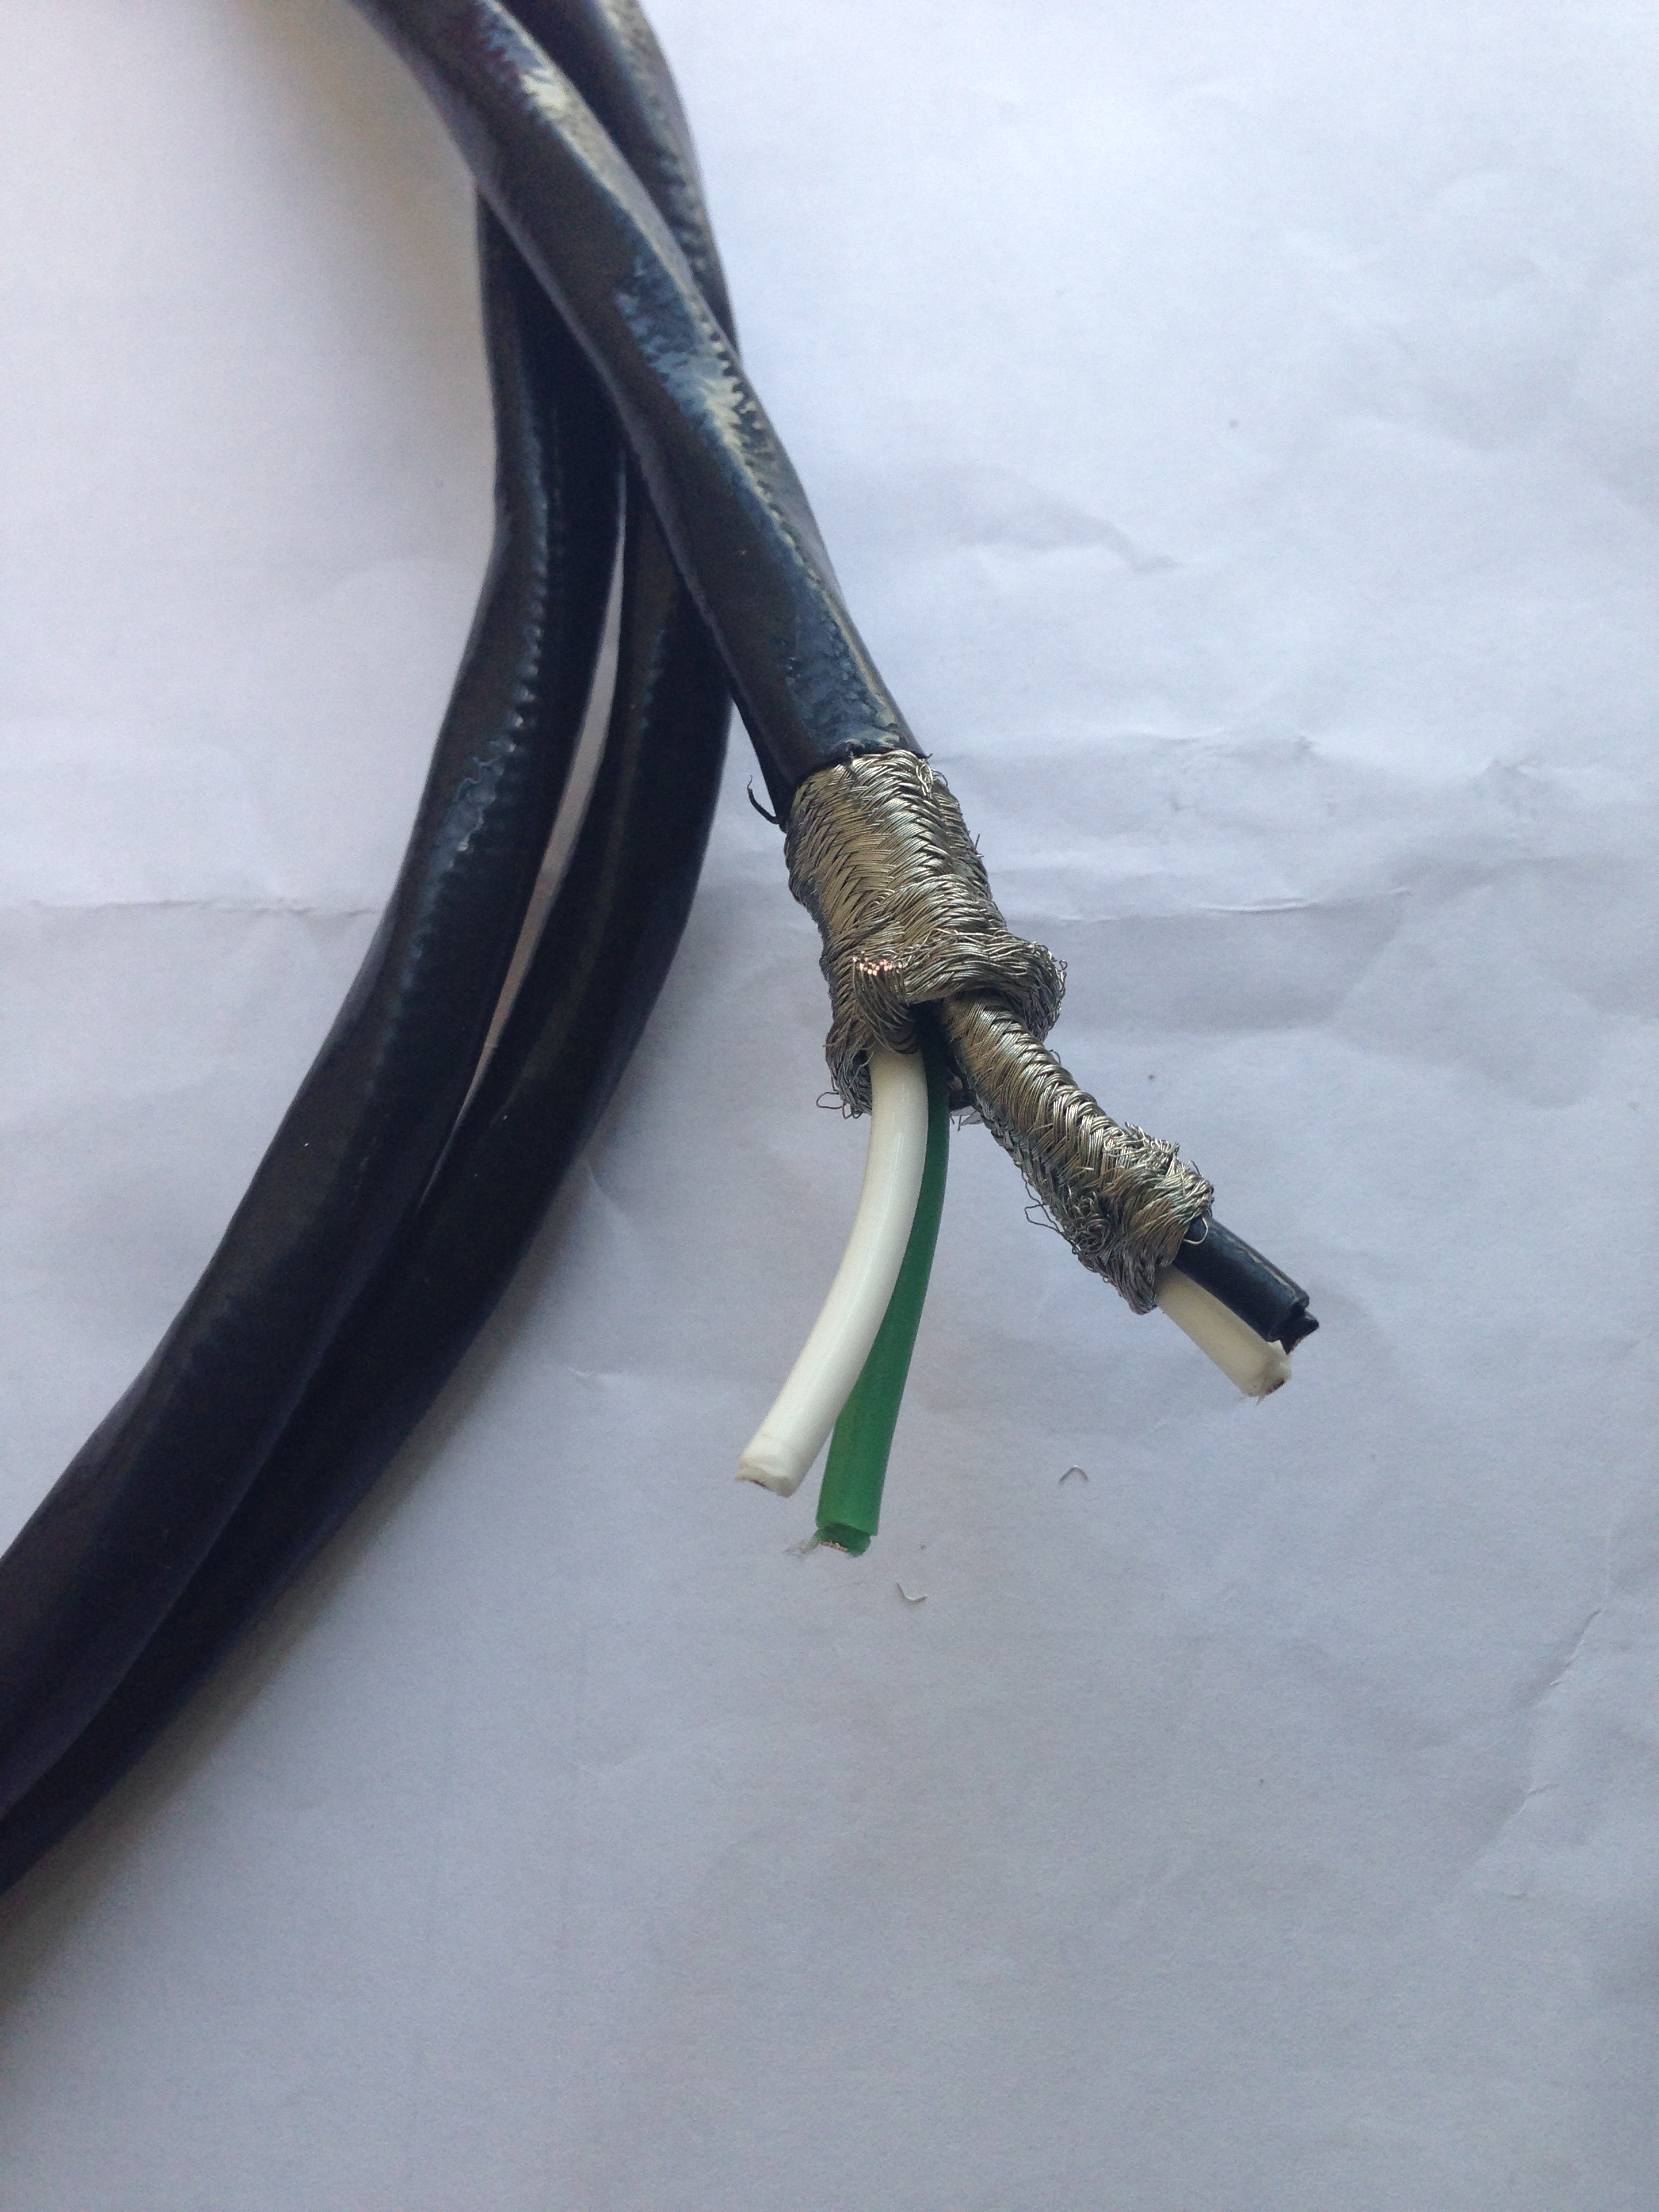  50mm2 FEP CABLE 